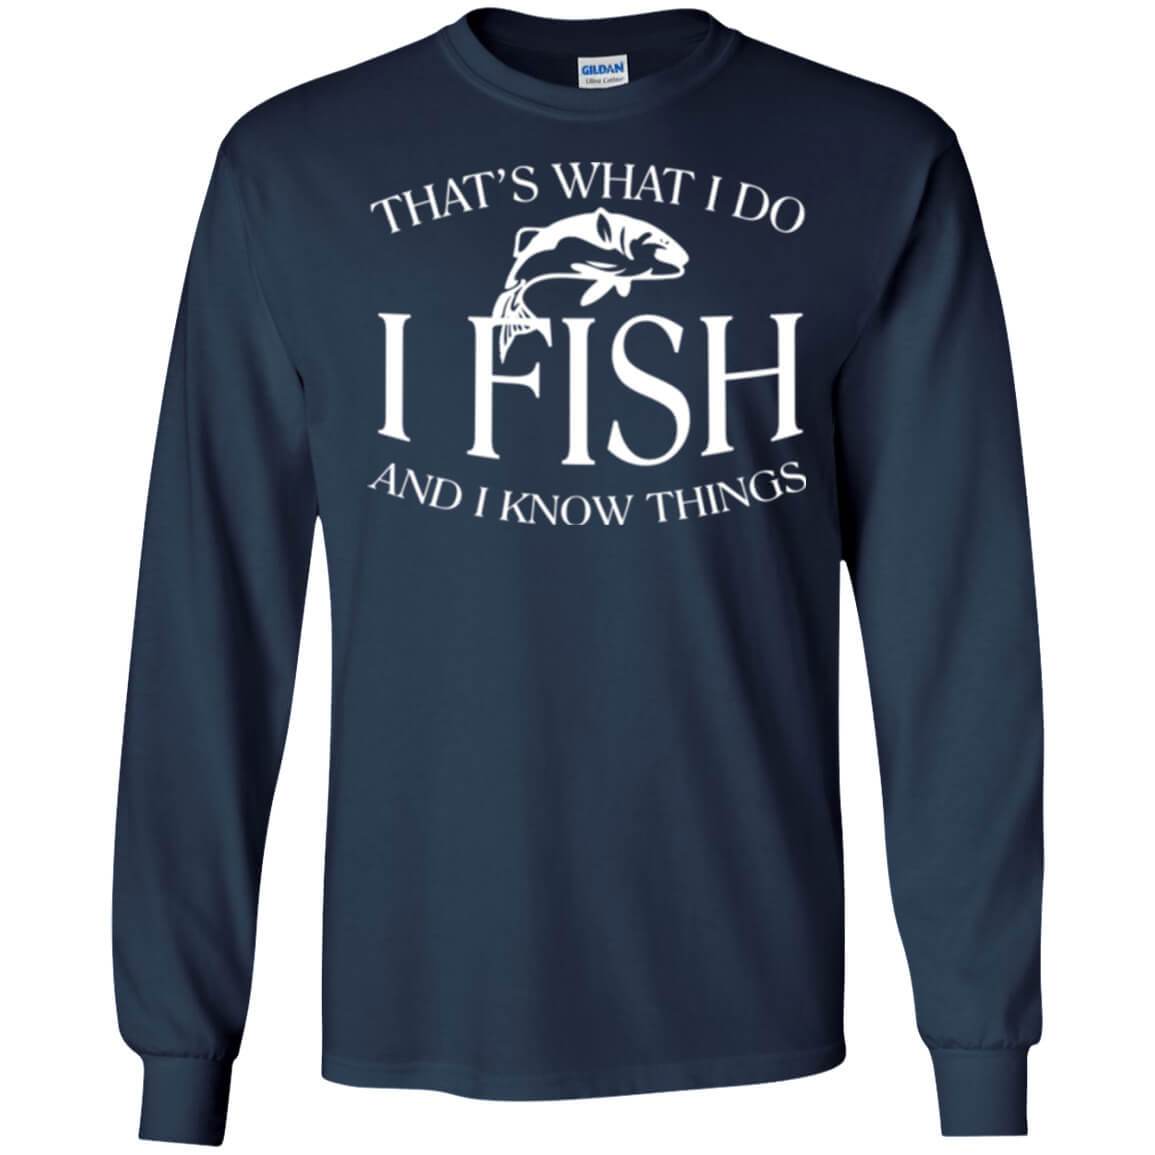 That's What I Do Long Sleeve T-Shirt b